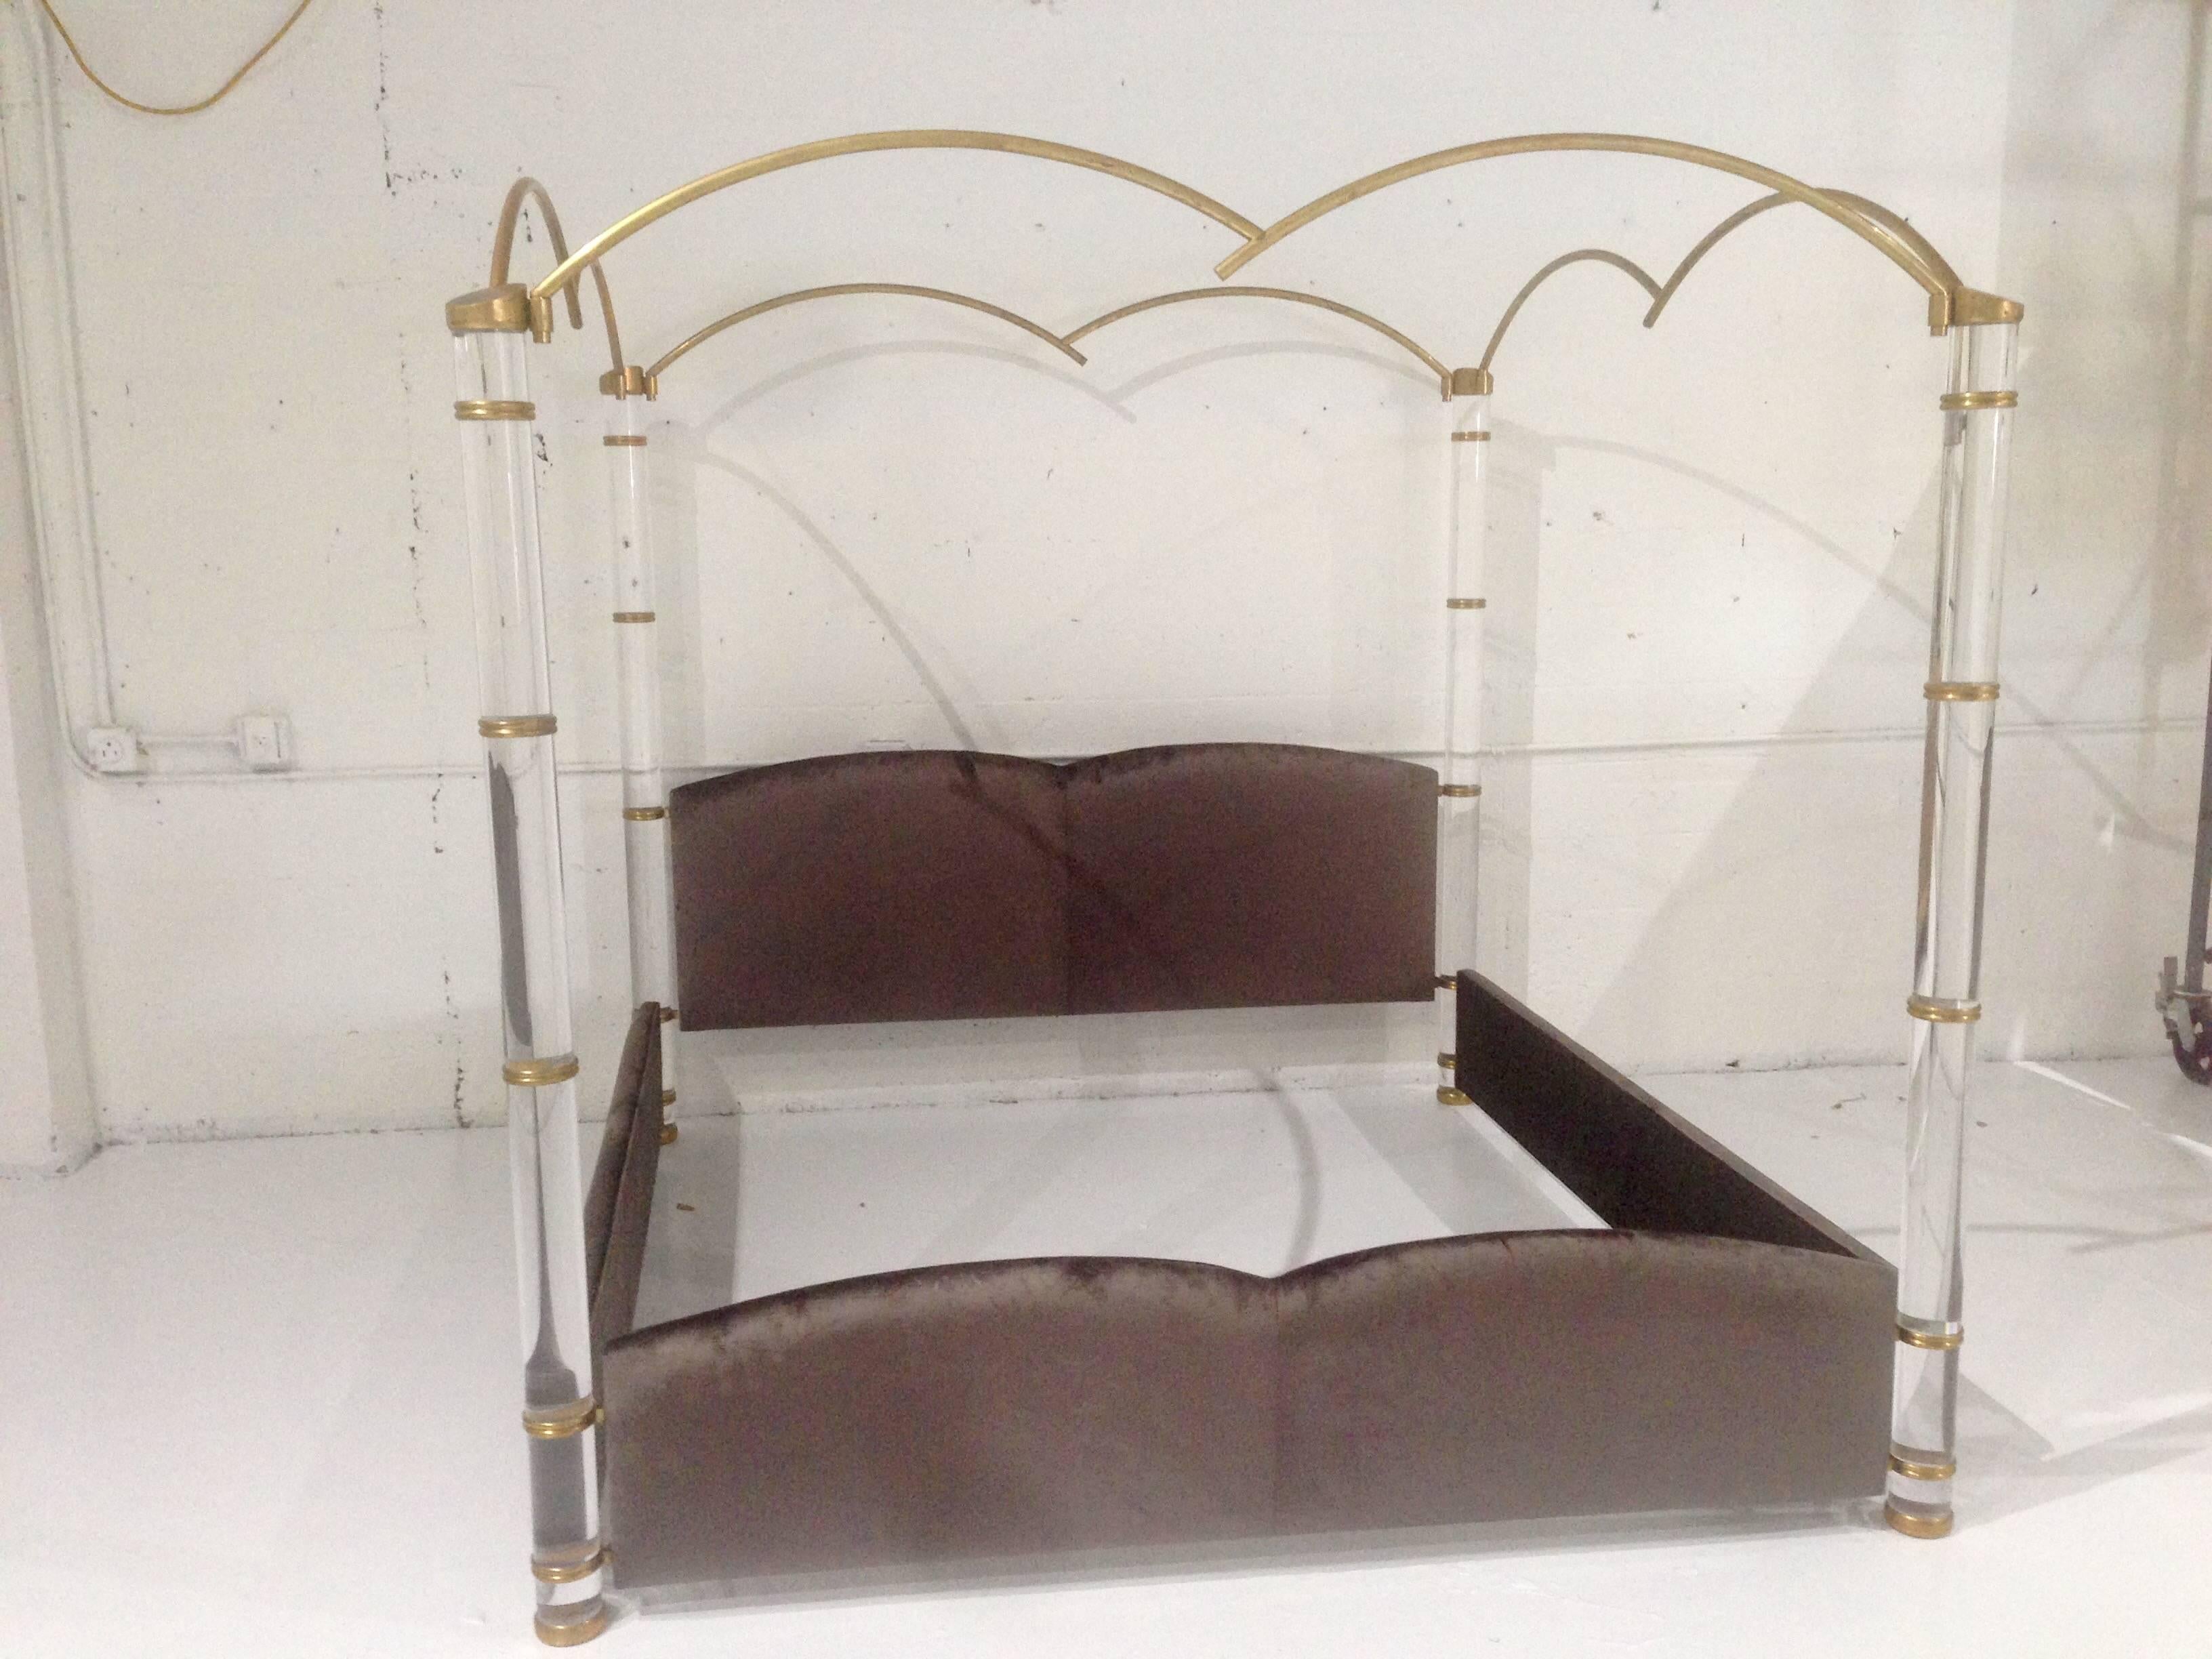 Stunning and beautiful is this king-size/poster bed designed and manufactured in Italy by Marcello Mioni in the early 1960s.

The bed is designed beautifully, the Lucite posts are thick and substantial, the solid brass fittings show a very nice